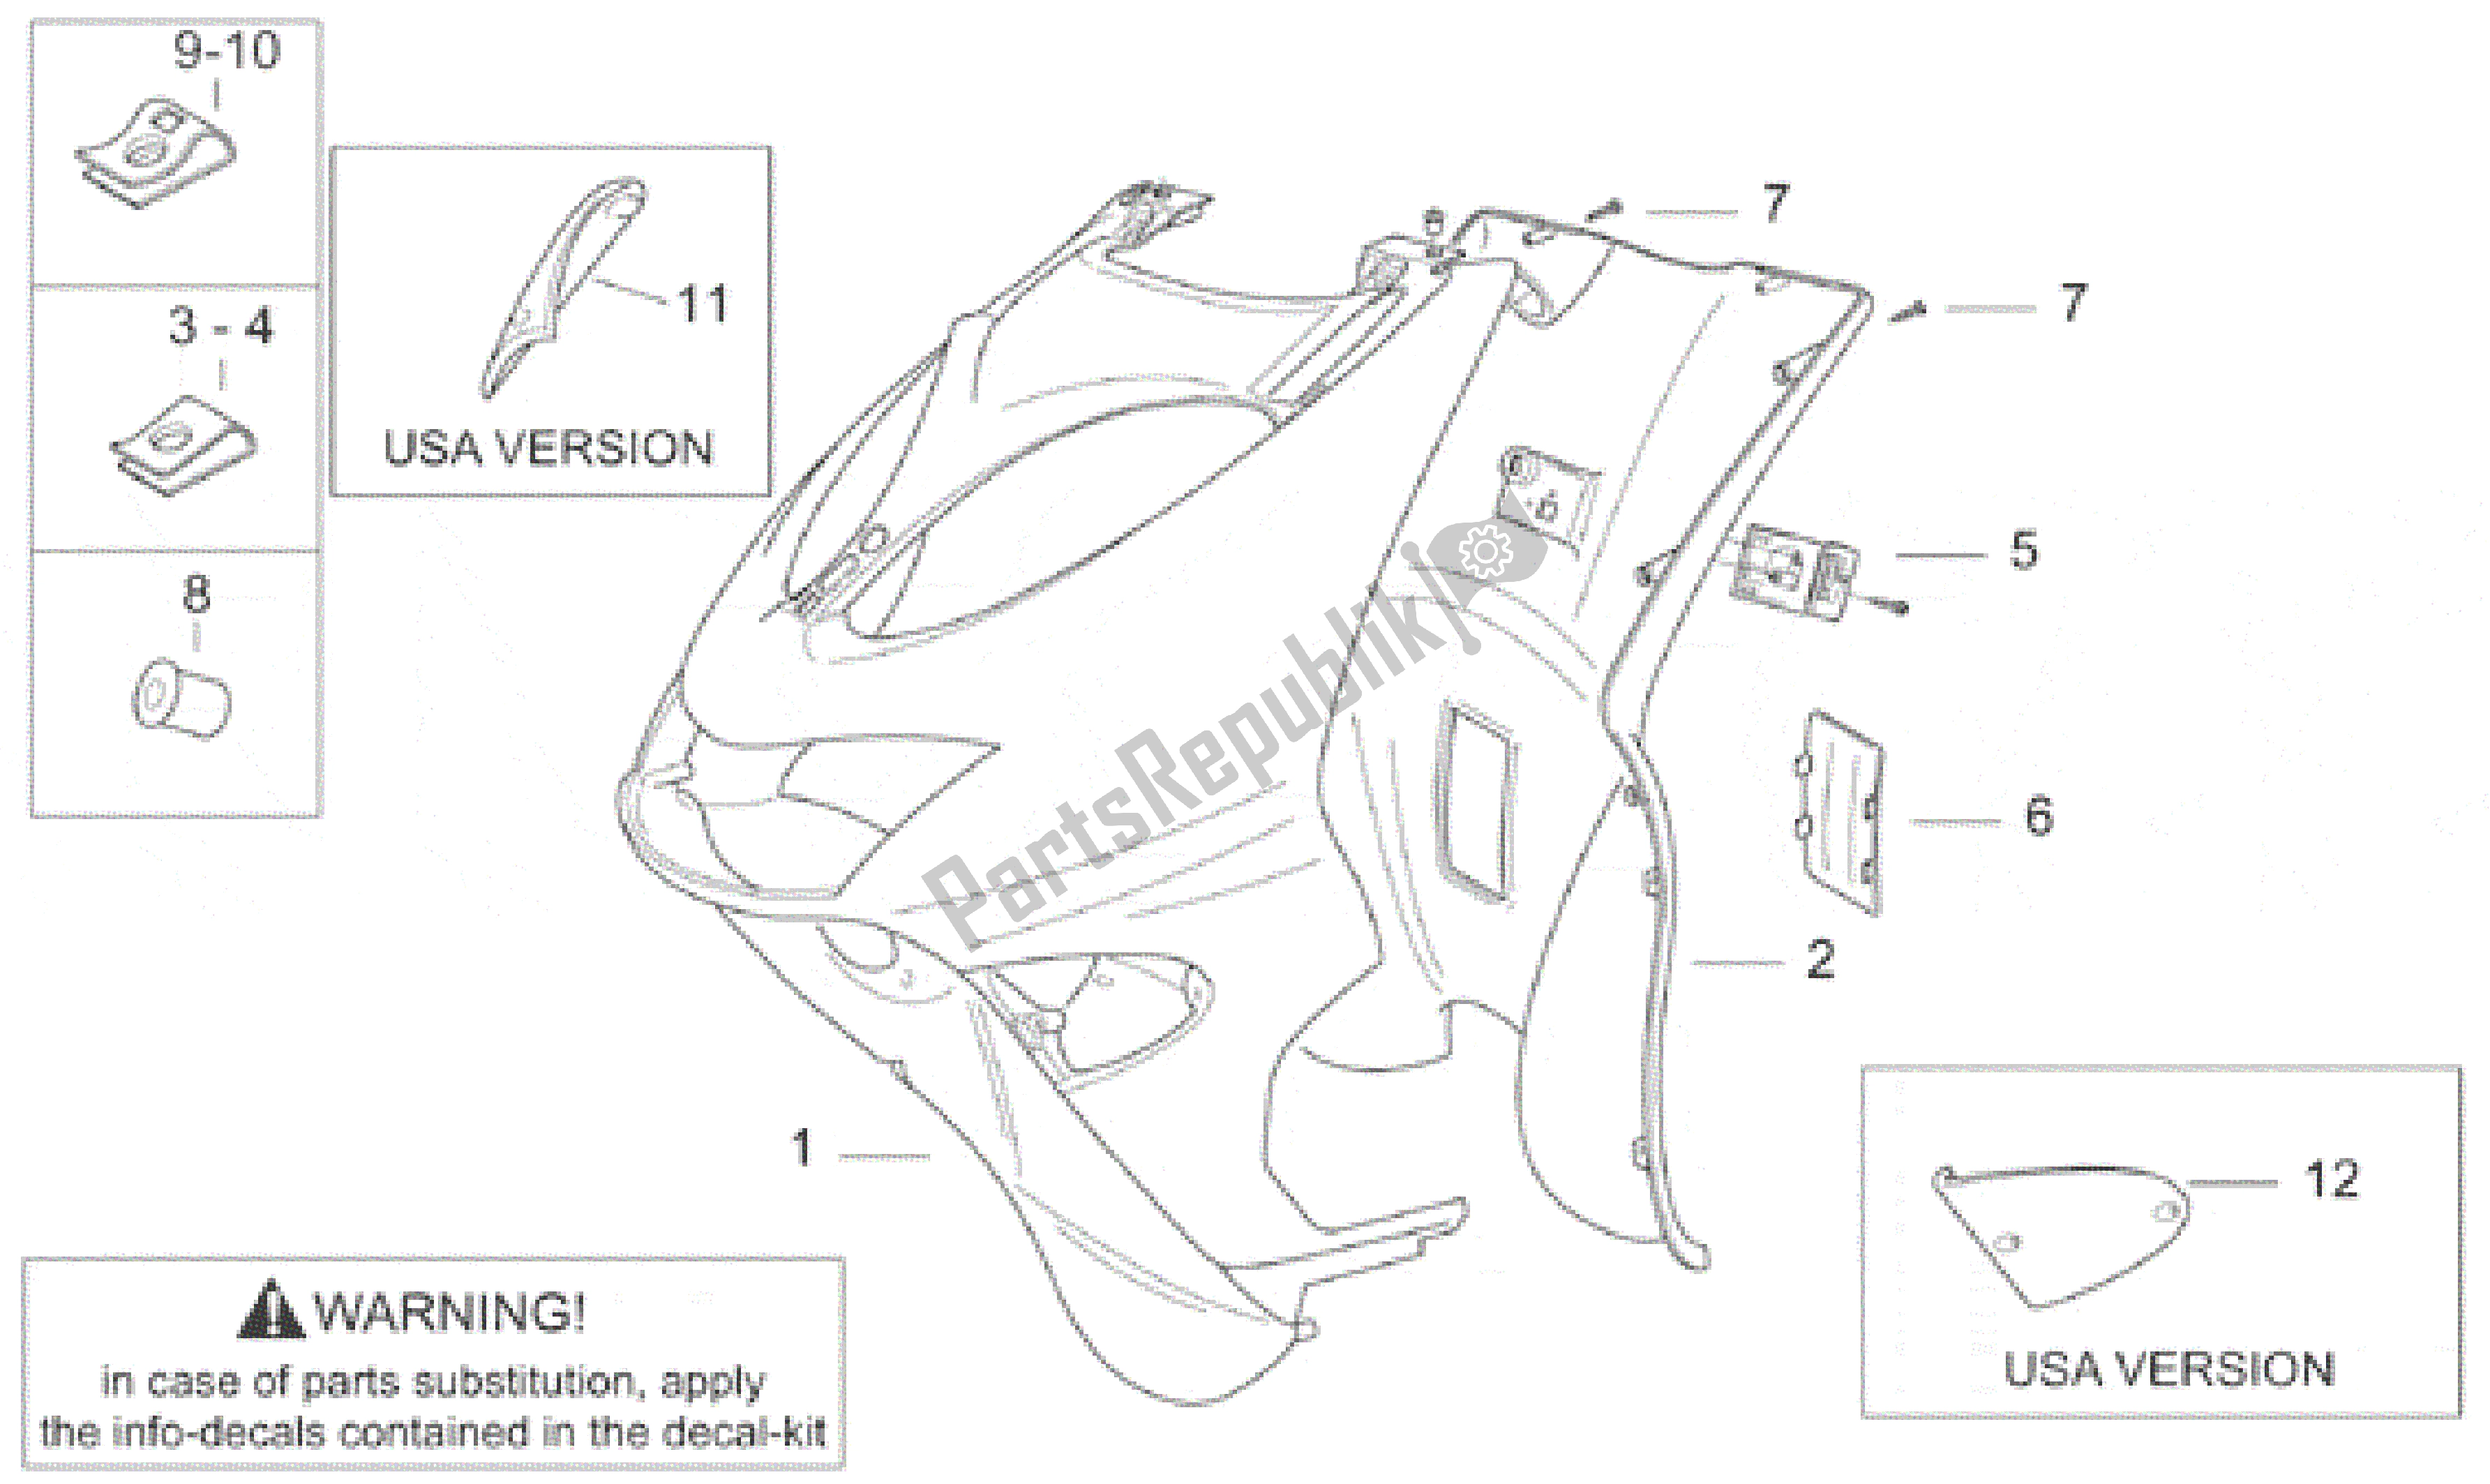 All parts for the Front Body Iii of the Aprilia SR WWW 50 1997 - 1999